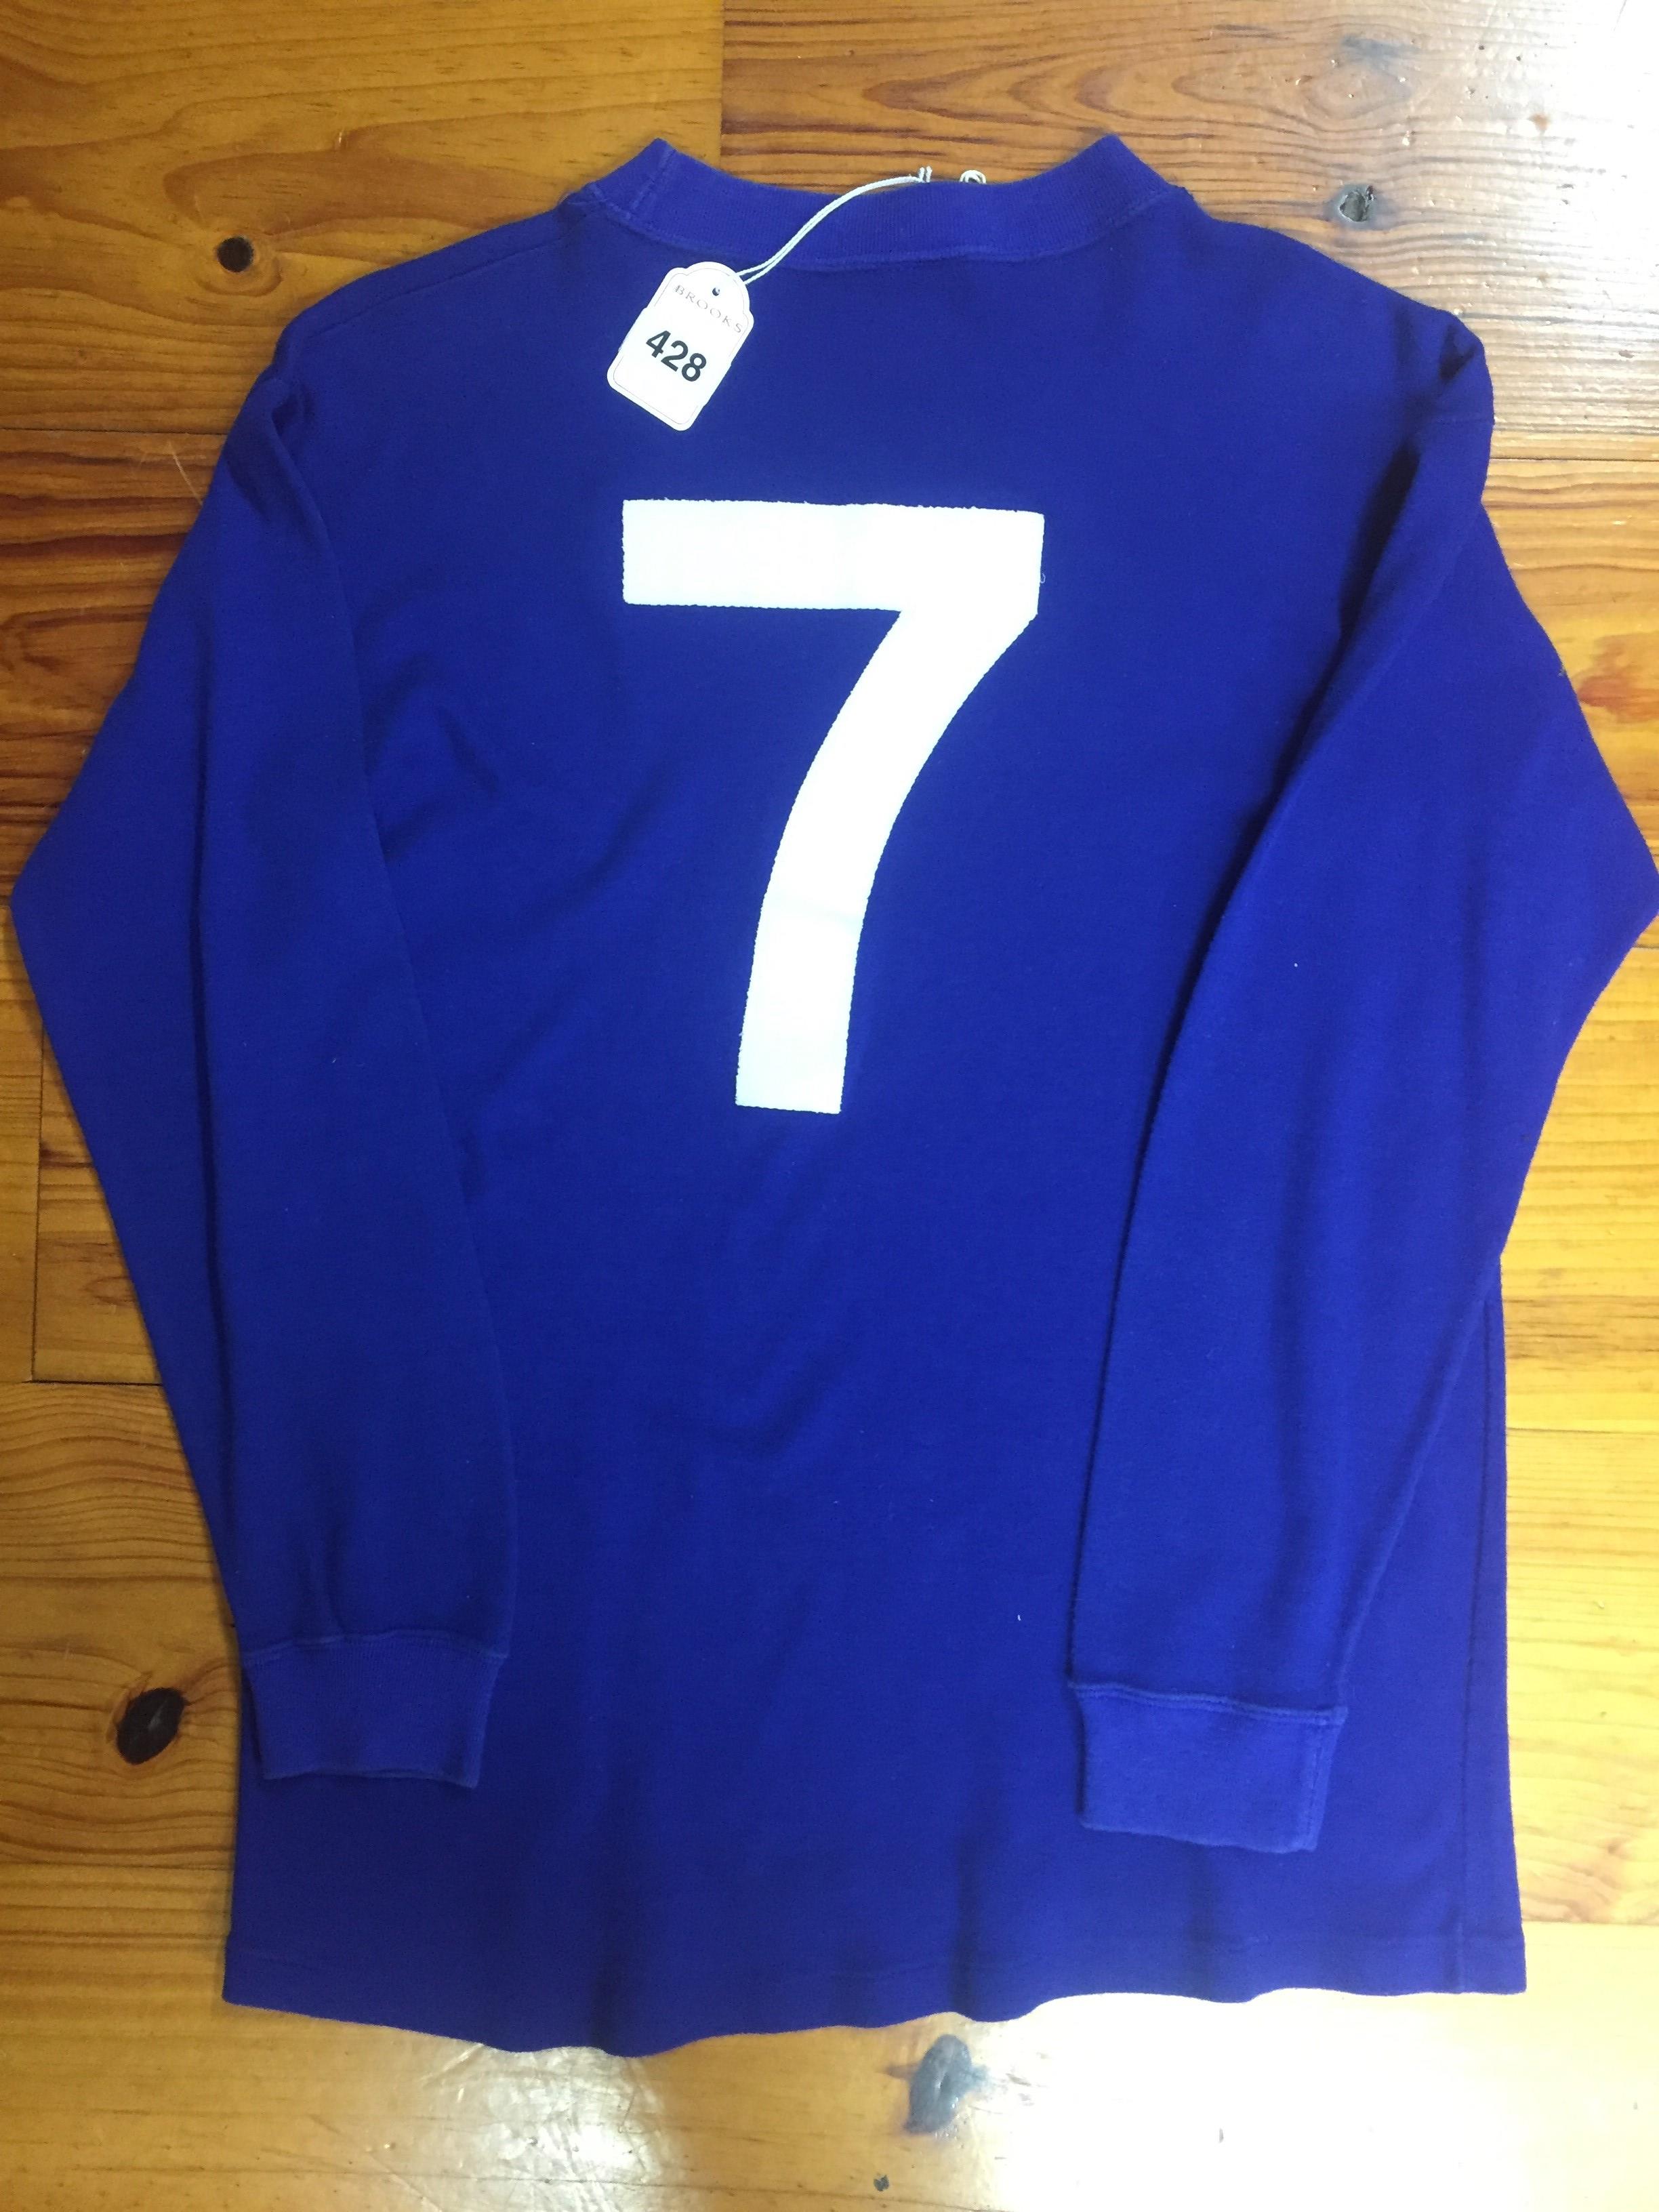 George Best Match Worn Manchester United Shirt: Worn in the Pat Crerand Testimonial on 26th November - Image 2 of 2